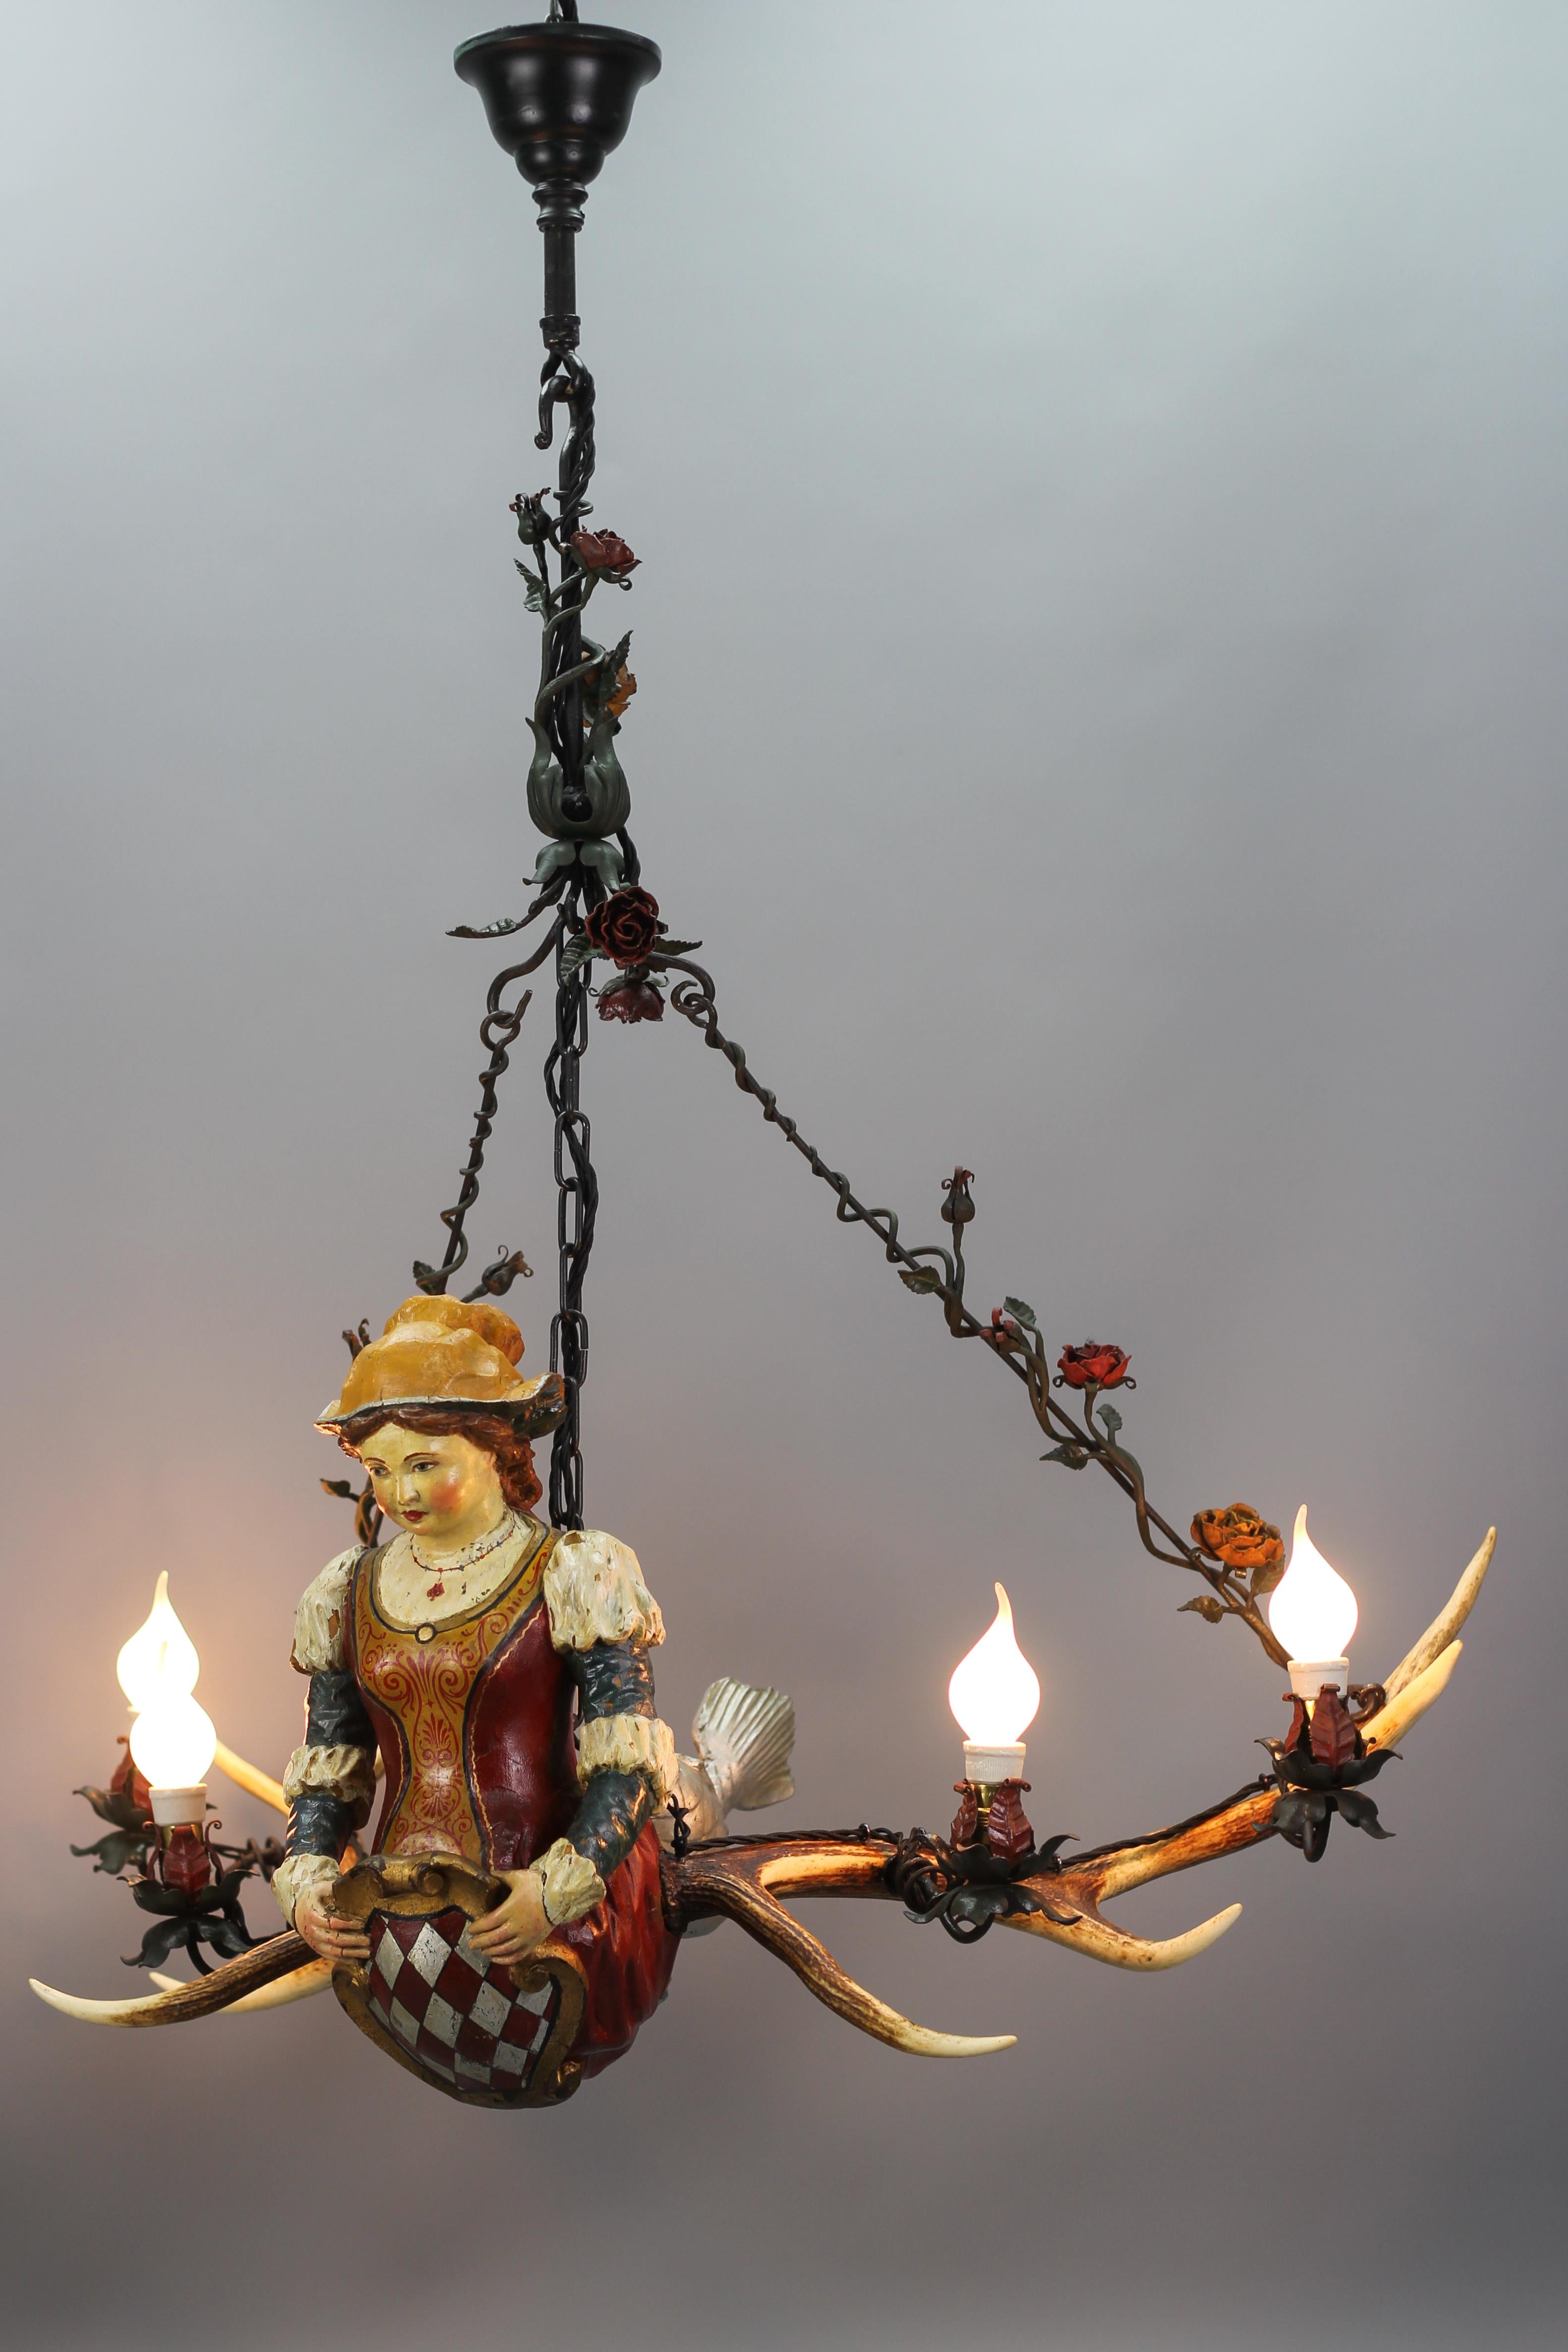 This amazing German chandelier features a delicate hand-carved and polychrome hand-painted mythical lady or mermaid with a scaly fishtail. The adorable and handsome lady is holding a cartouche-shaped shield. 
The light fixture is hung on a chain